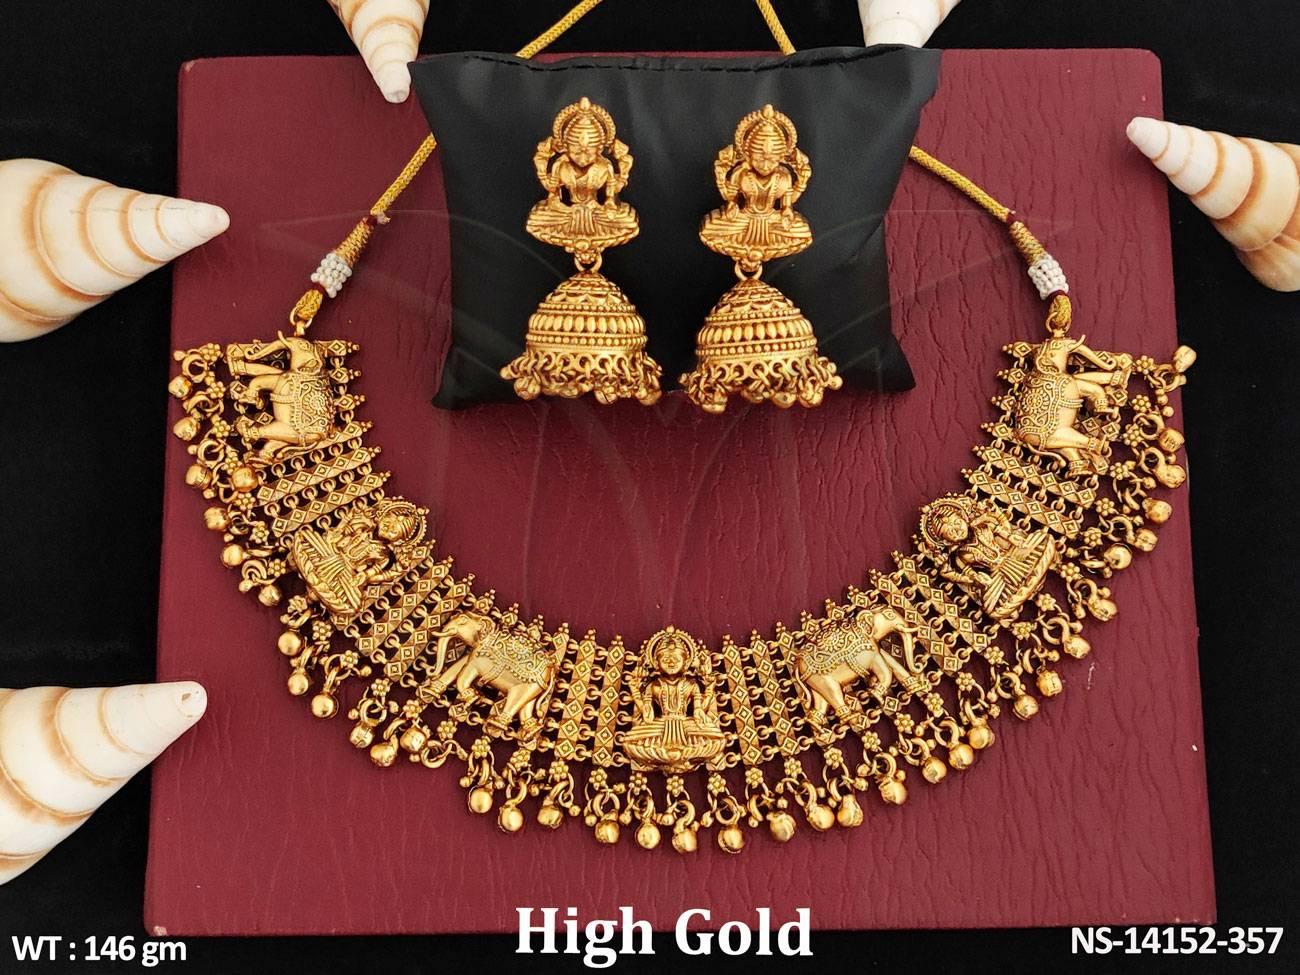 Antique Jewellery Necklace Set is crafted with an eye-catching gold polish and elegant vintage design, featuring elephant and lakshmi motifs.